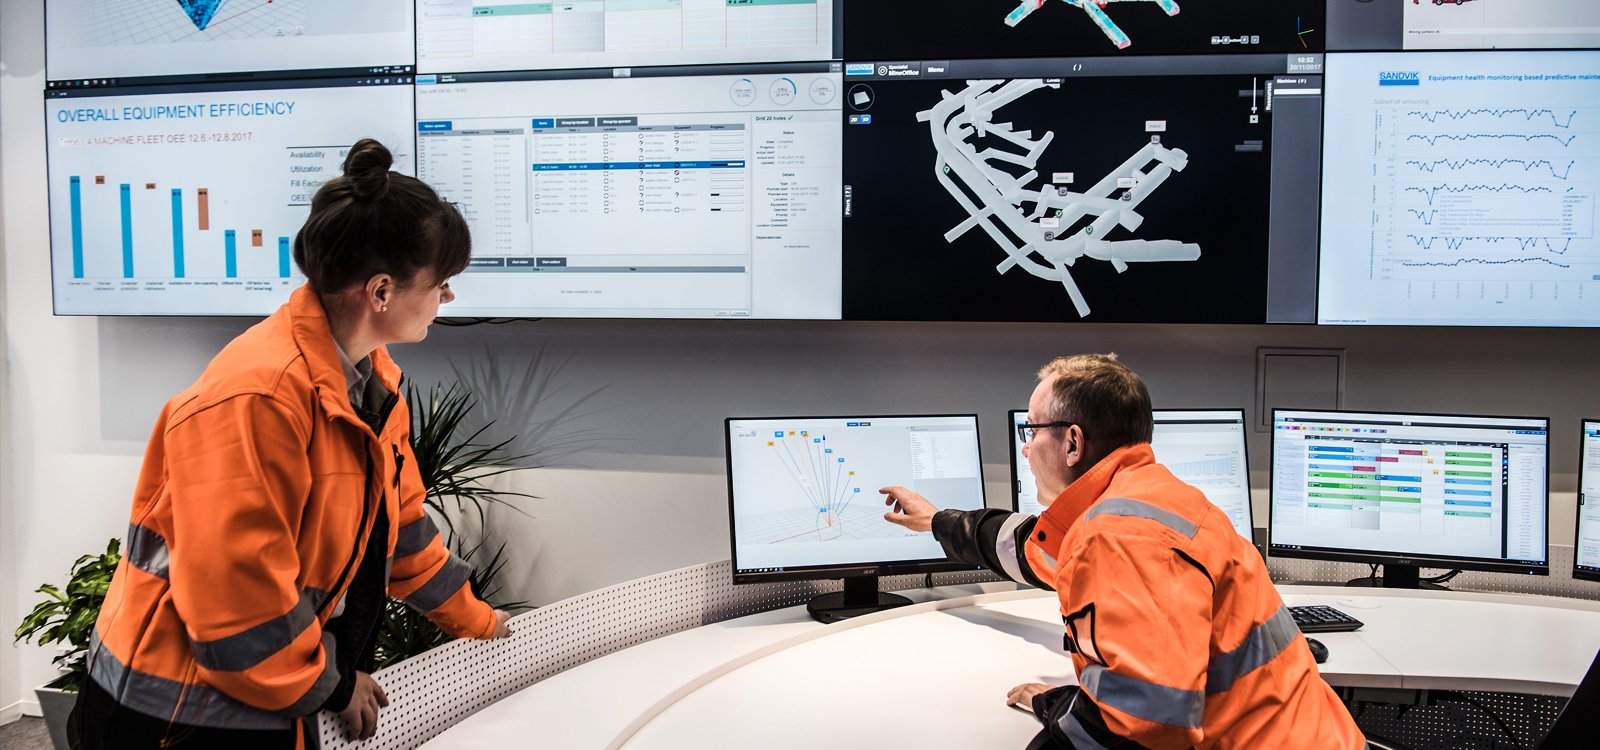 <p>OptiMine Analytics builds on the IBM Watson artificial intelligence platform and merges its analytic and predictive modelling capabilities with Sandvik’s extensive knowledge of mining operations and equipment.</p>